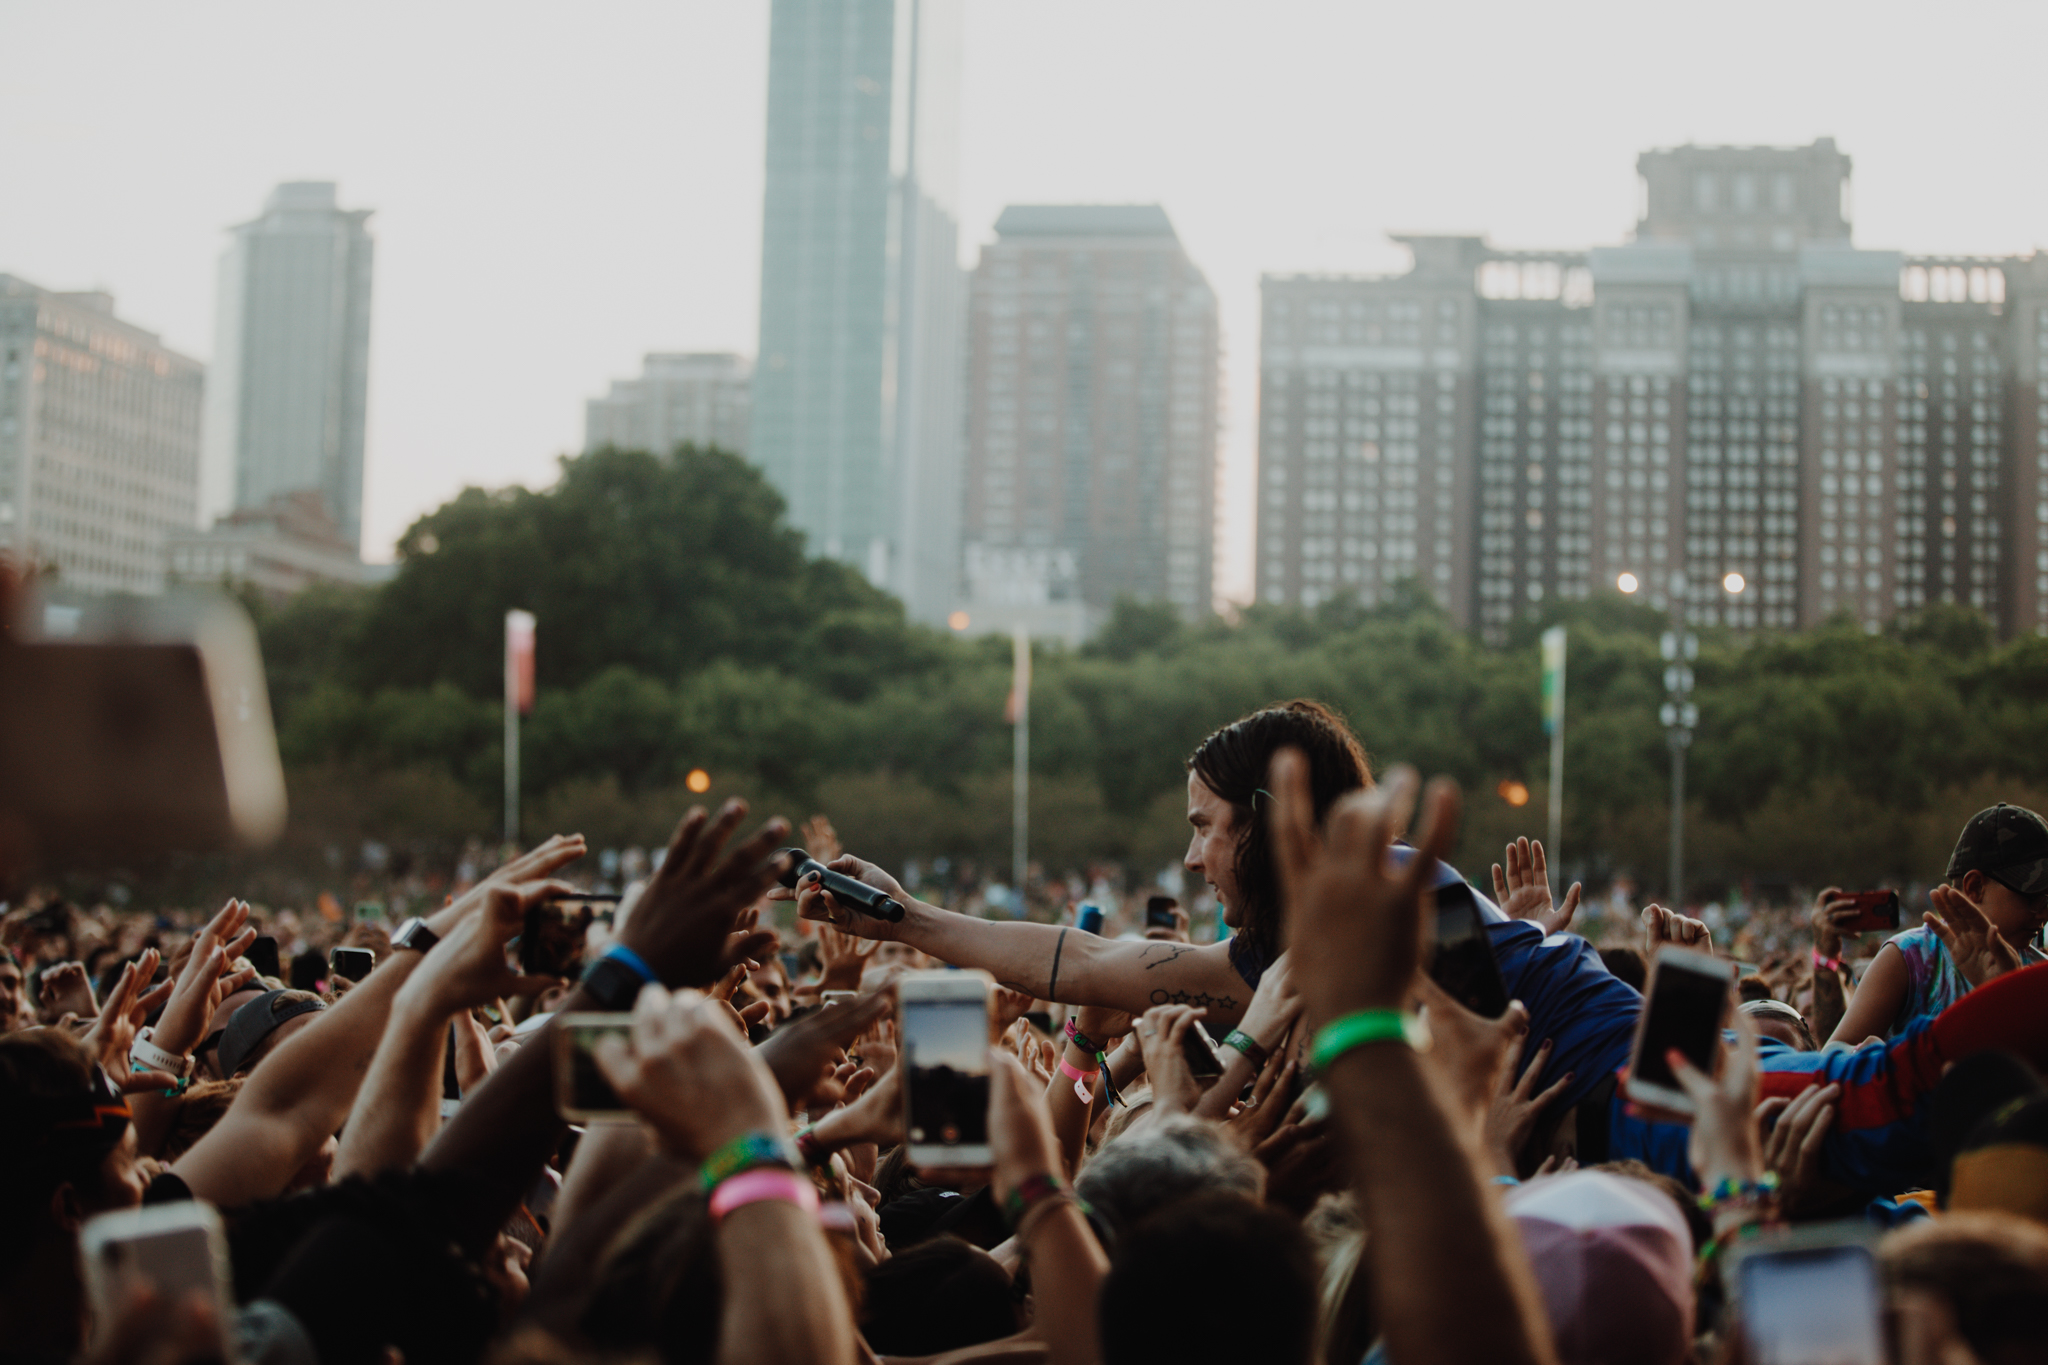 LIVE REVIEW: Lollapalooza 2019